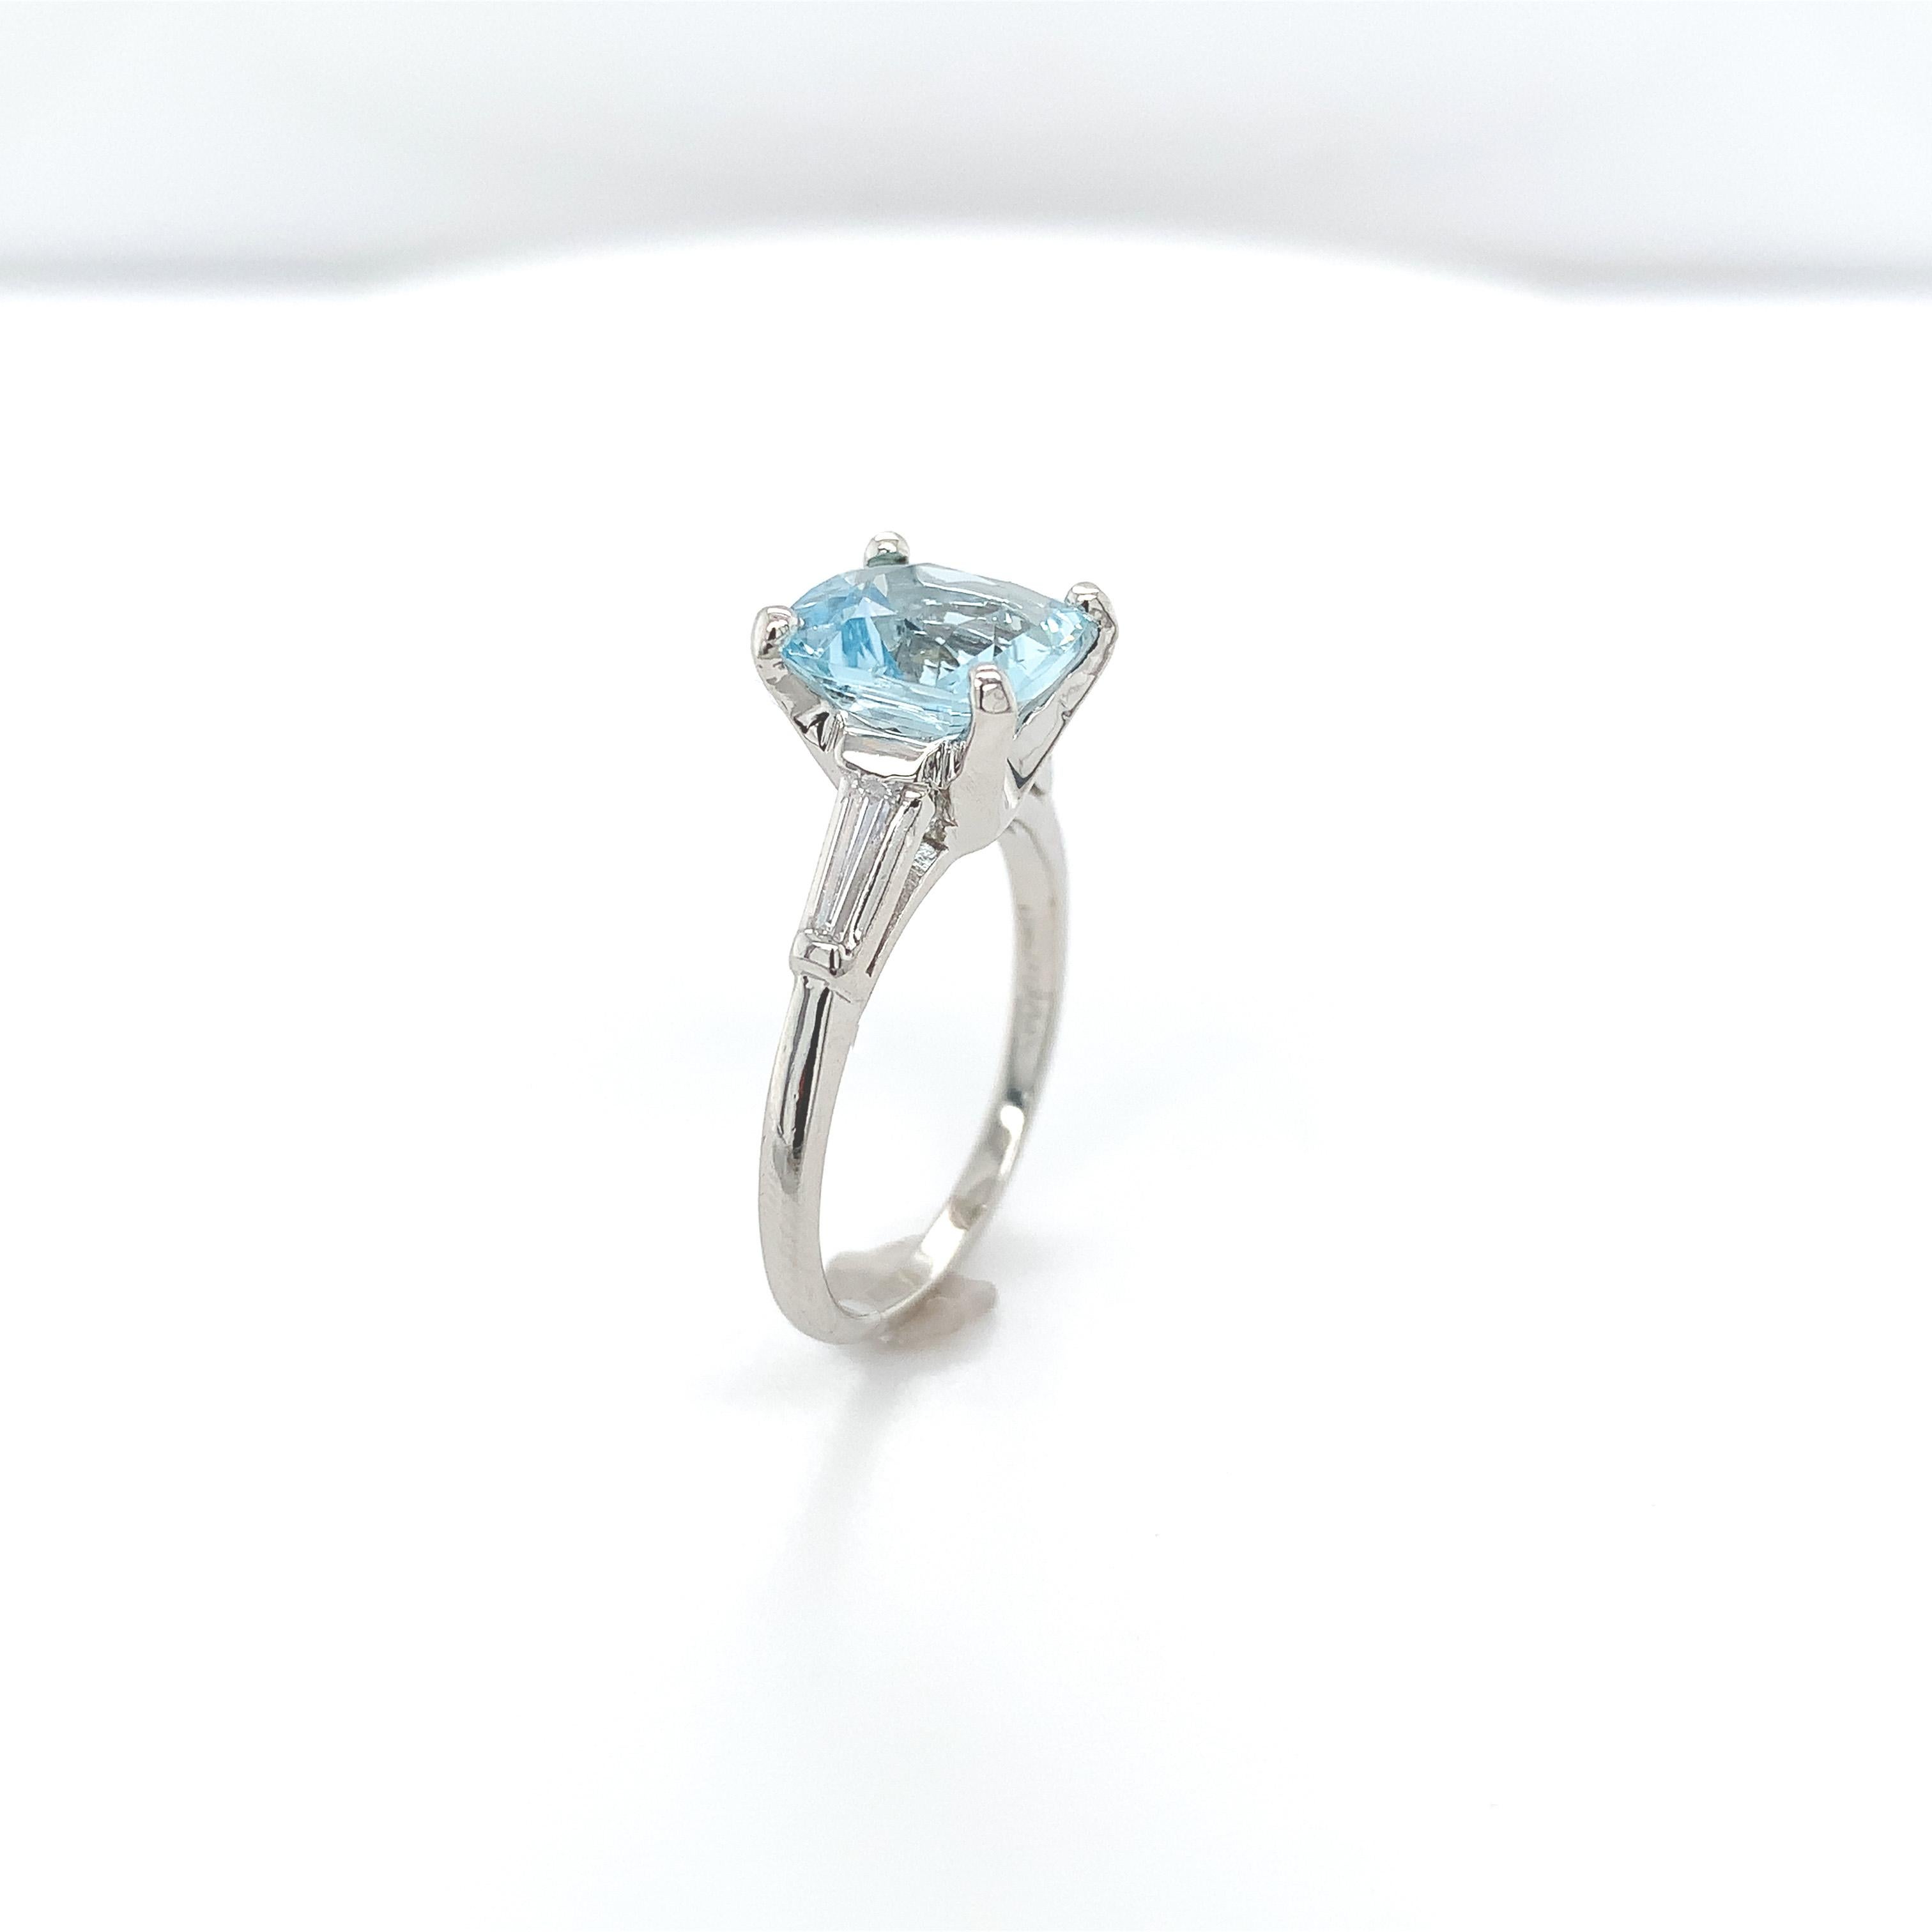 Platinum 2.51 carat Cushion Cut Aquamarine Ring with Diamond Baguettes In Good Condition For Sale In Big Bend, WI